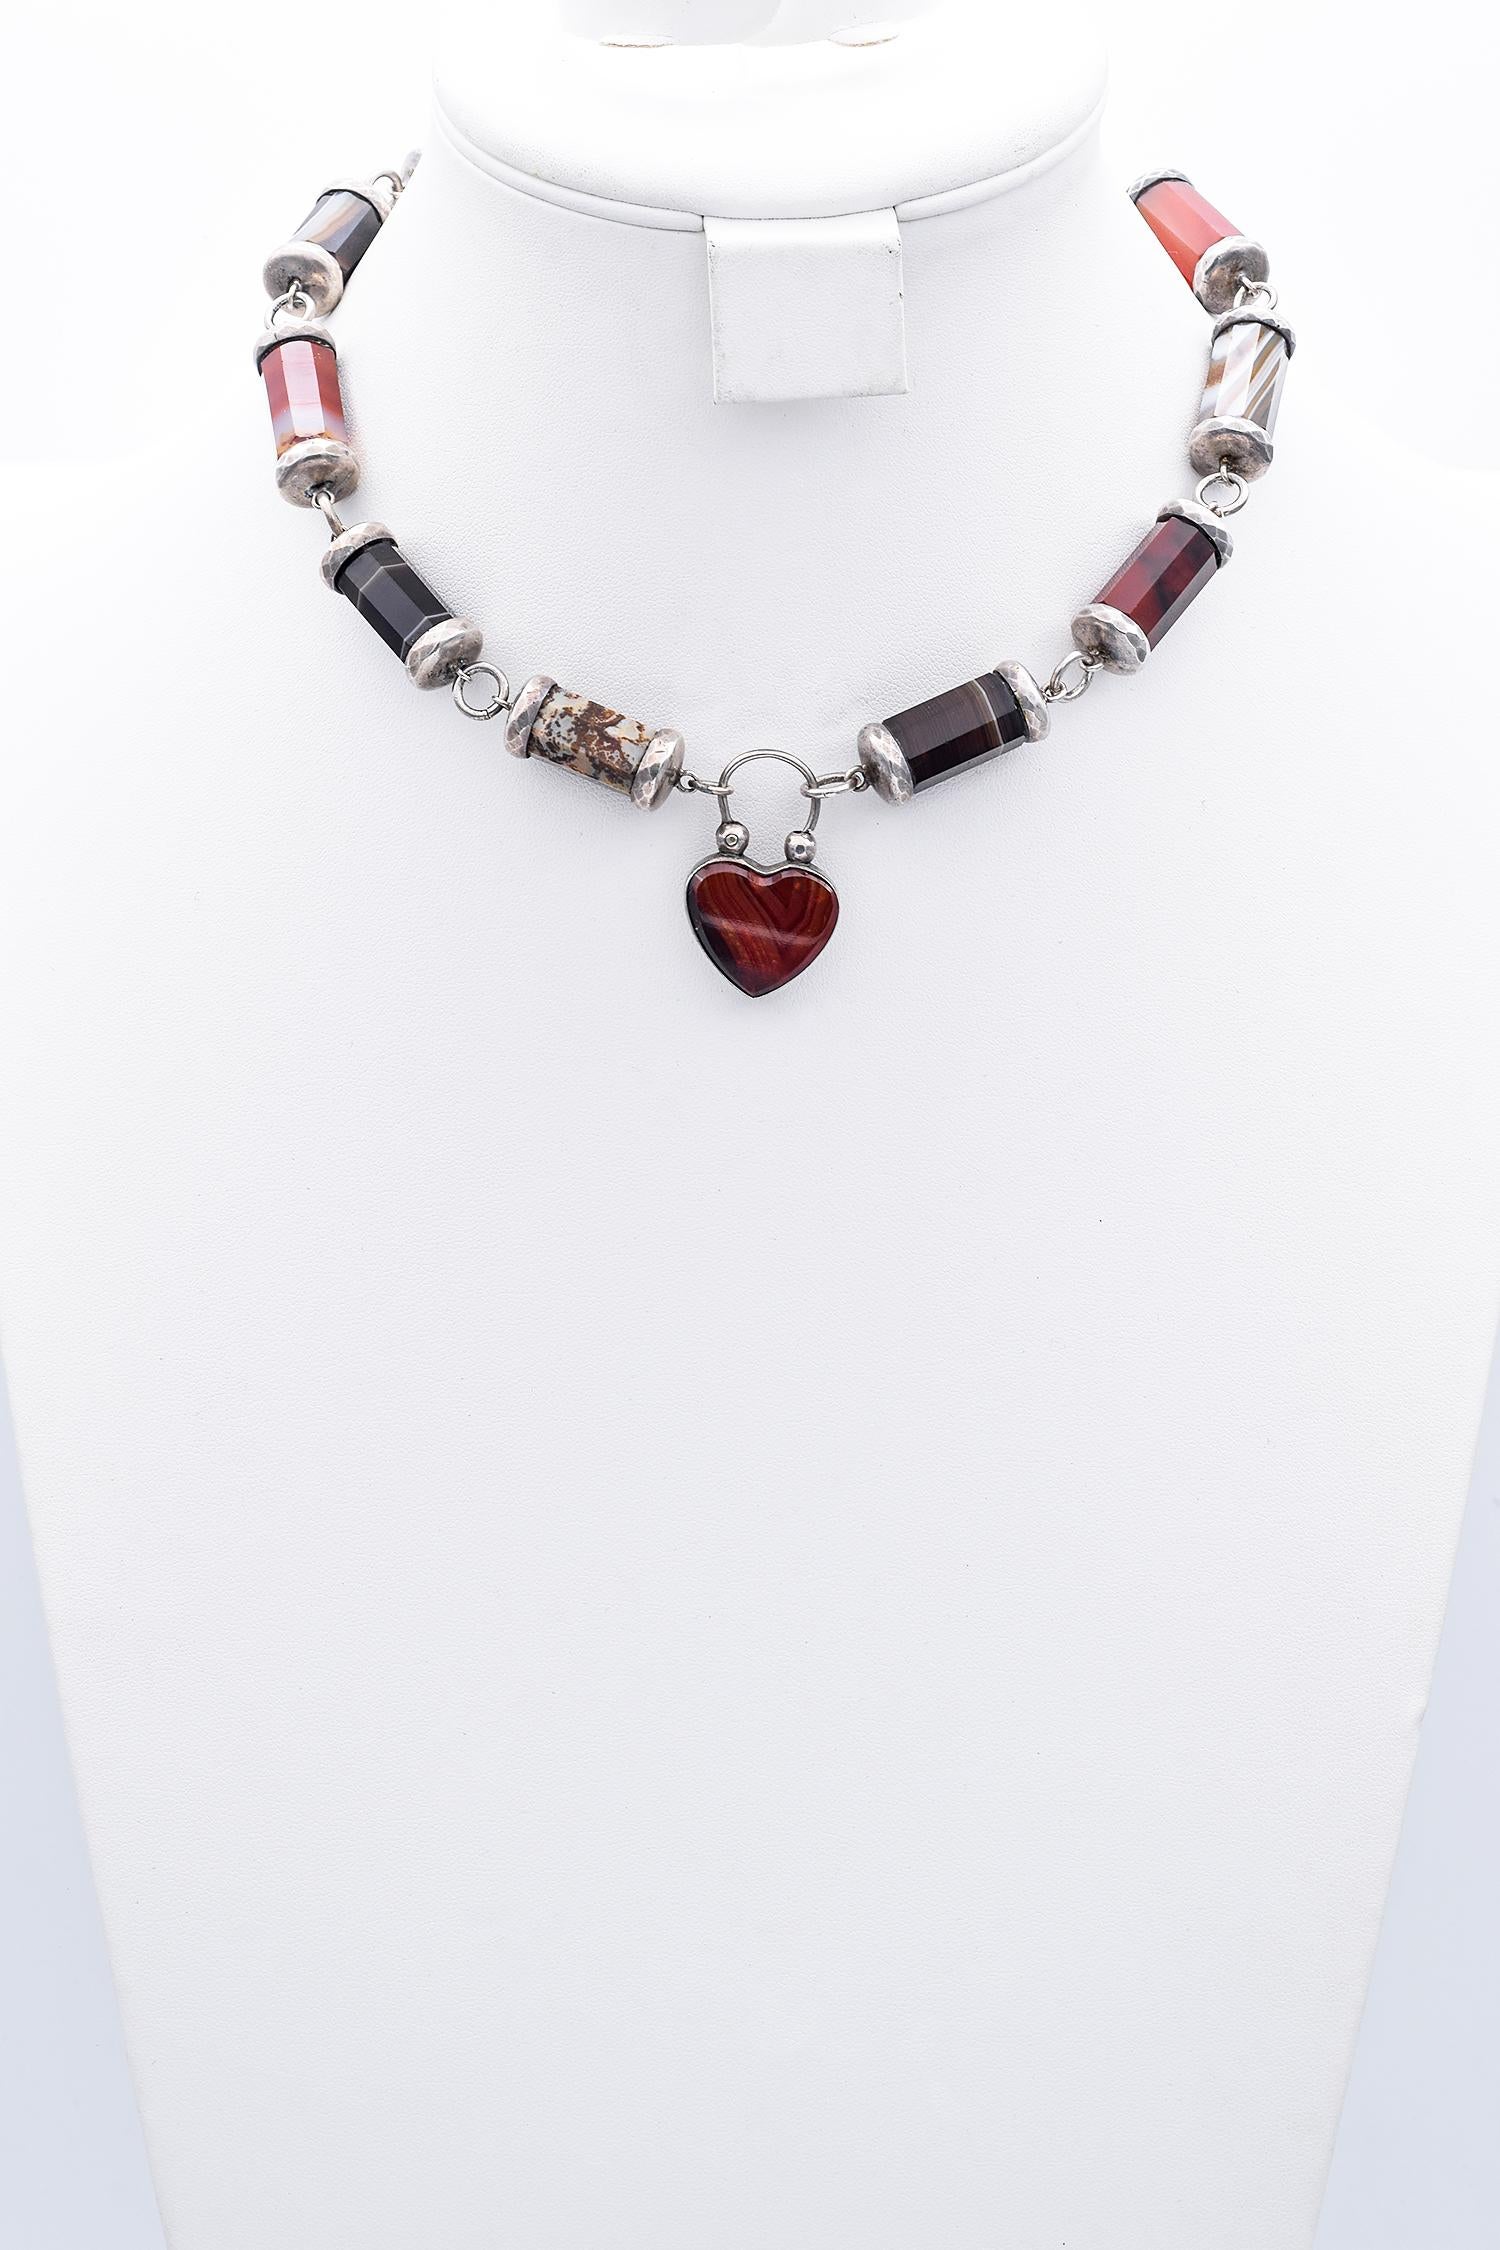 Antique Victorian Scottish Agate Silver Heart Padlock Pendant Necklace In Good Condition For Sale In New York, NY